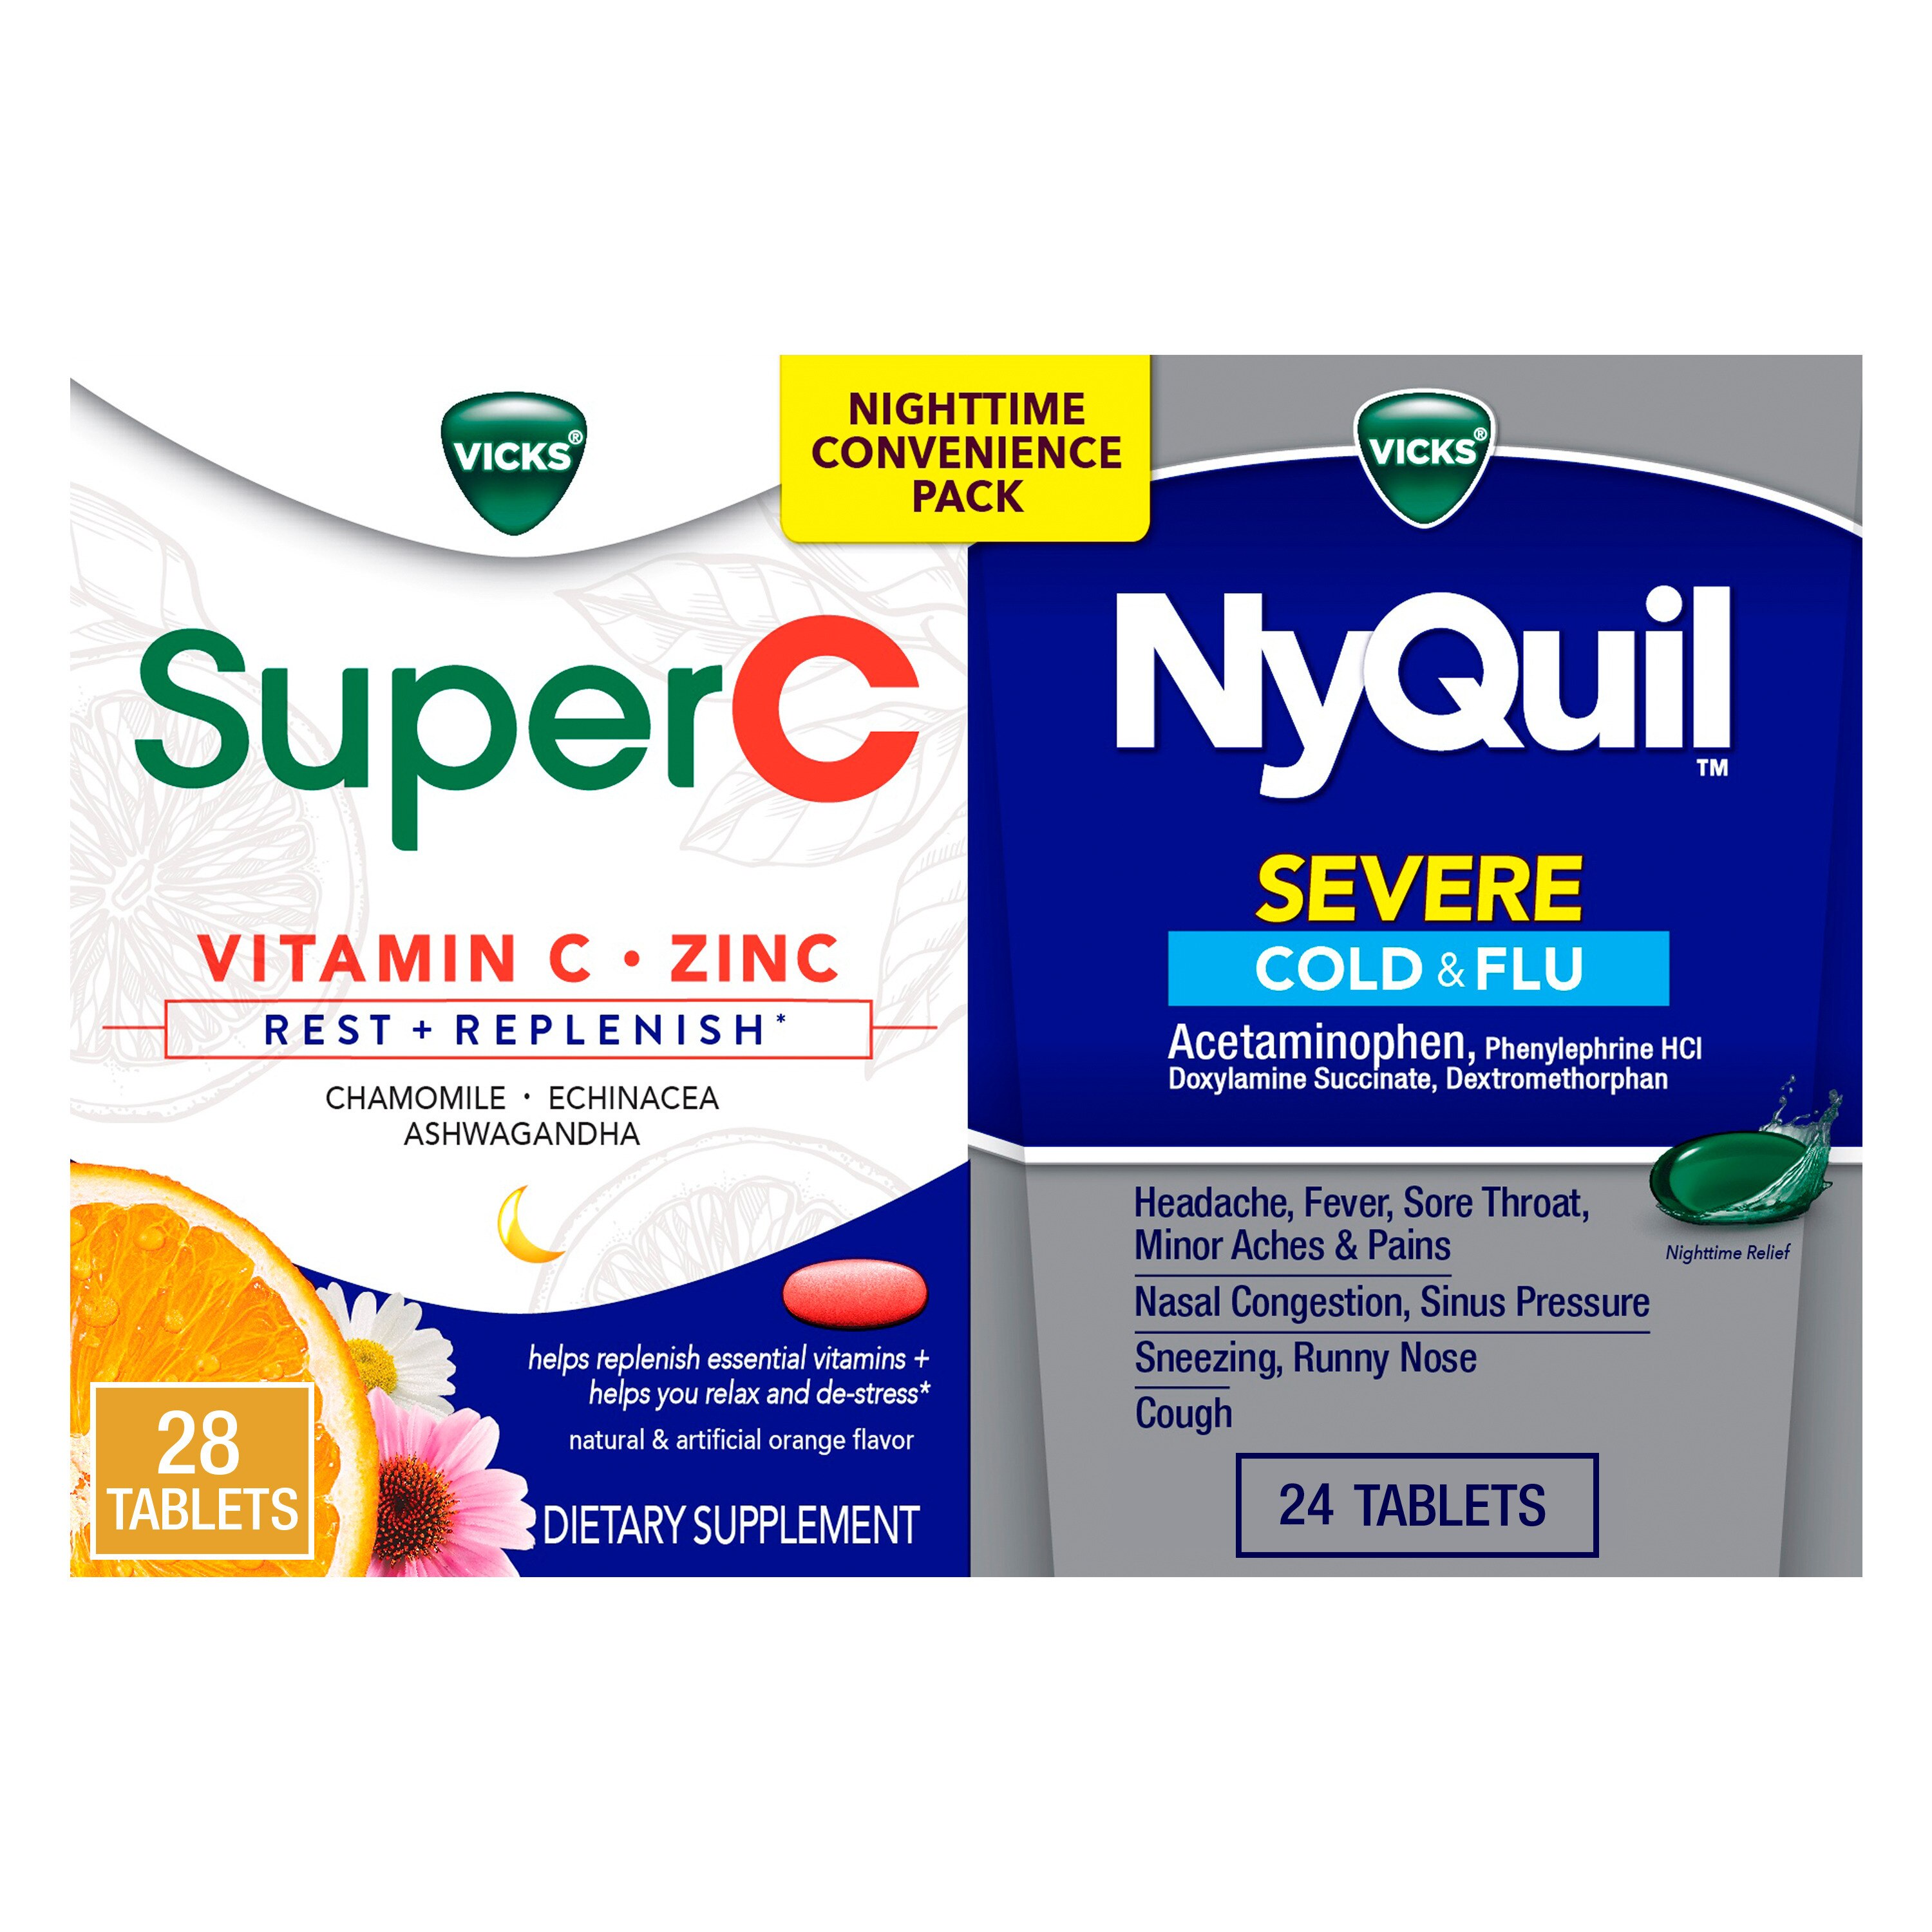 Vicks NyQuil and Super C Convenience Pack: NyQuil Severe Medicine for Max Strength Cold and Flu Relief, 26 CT